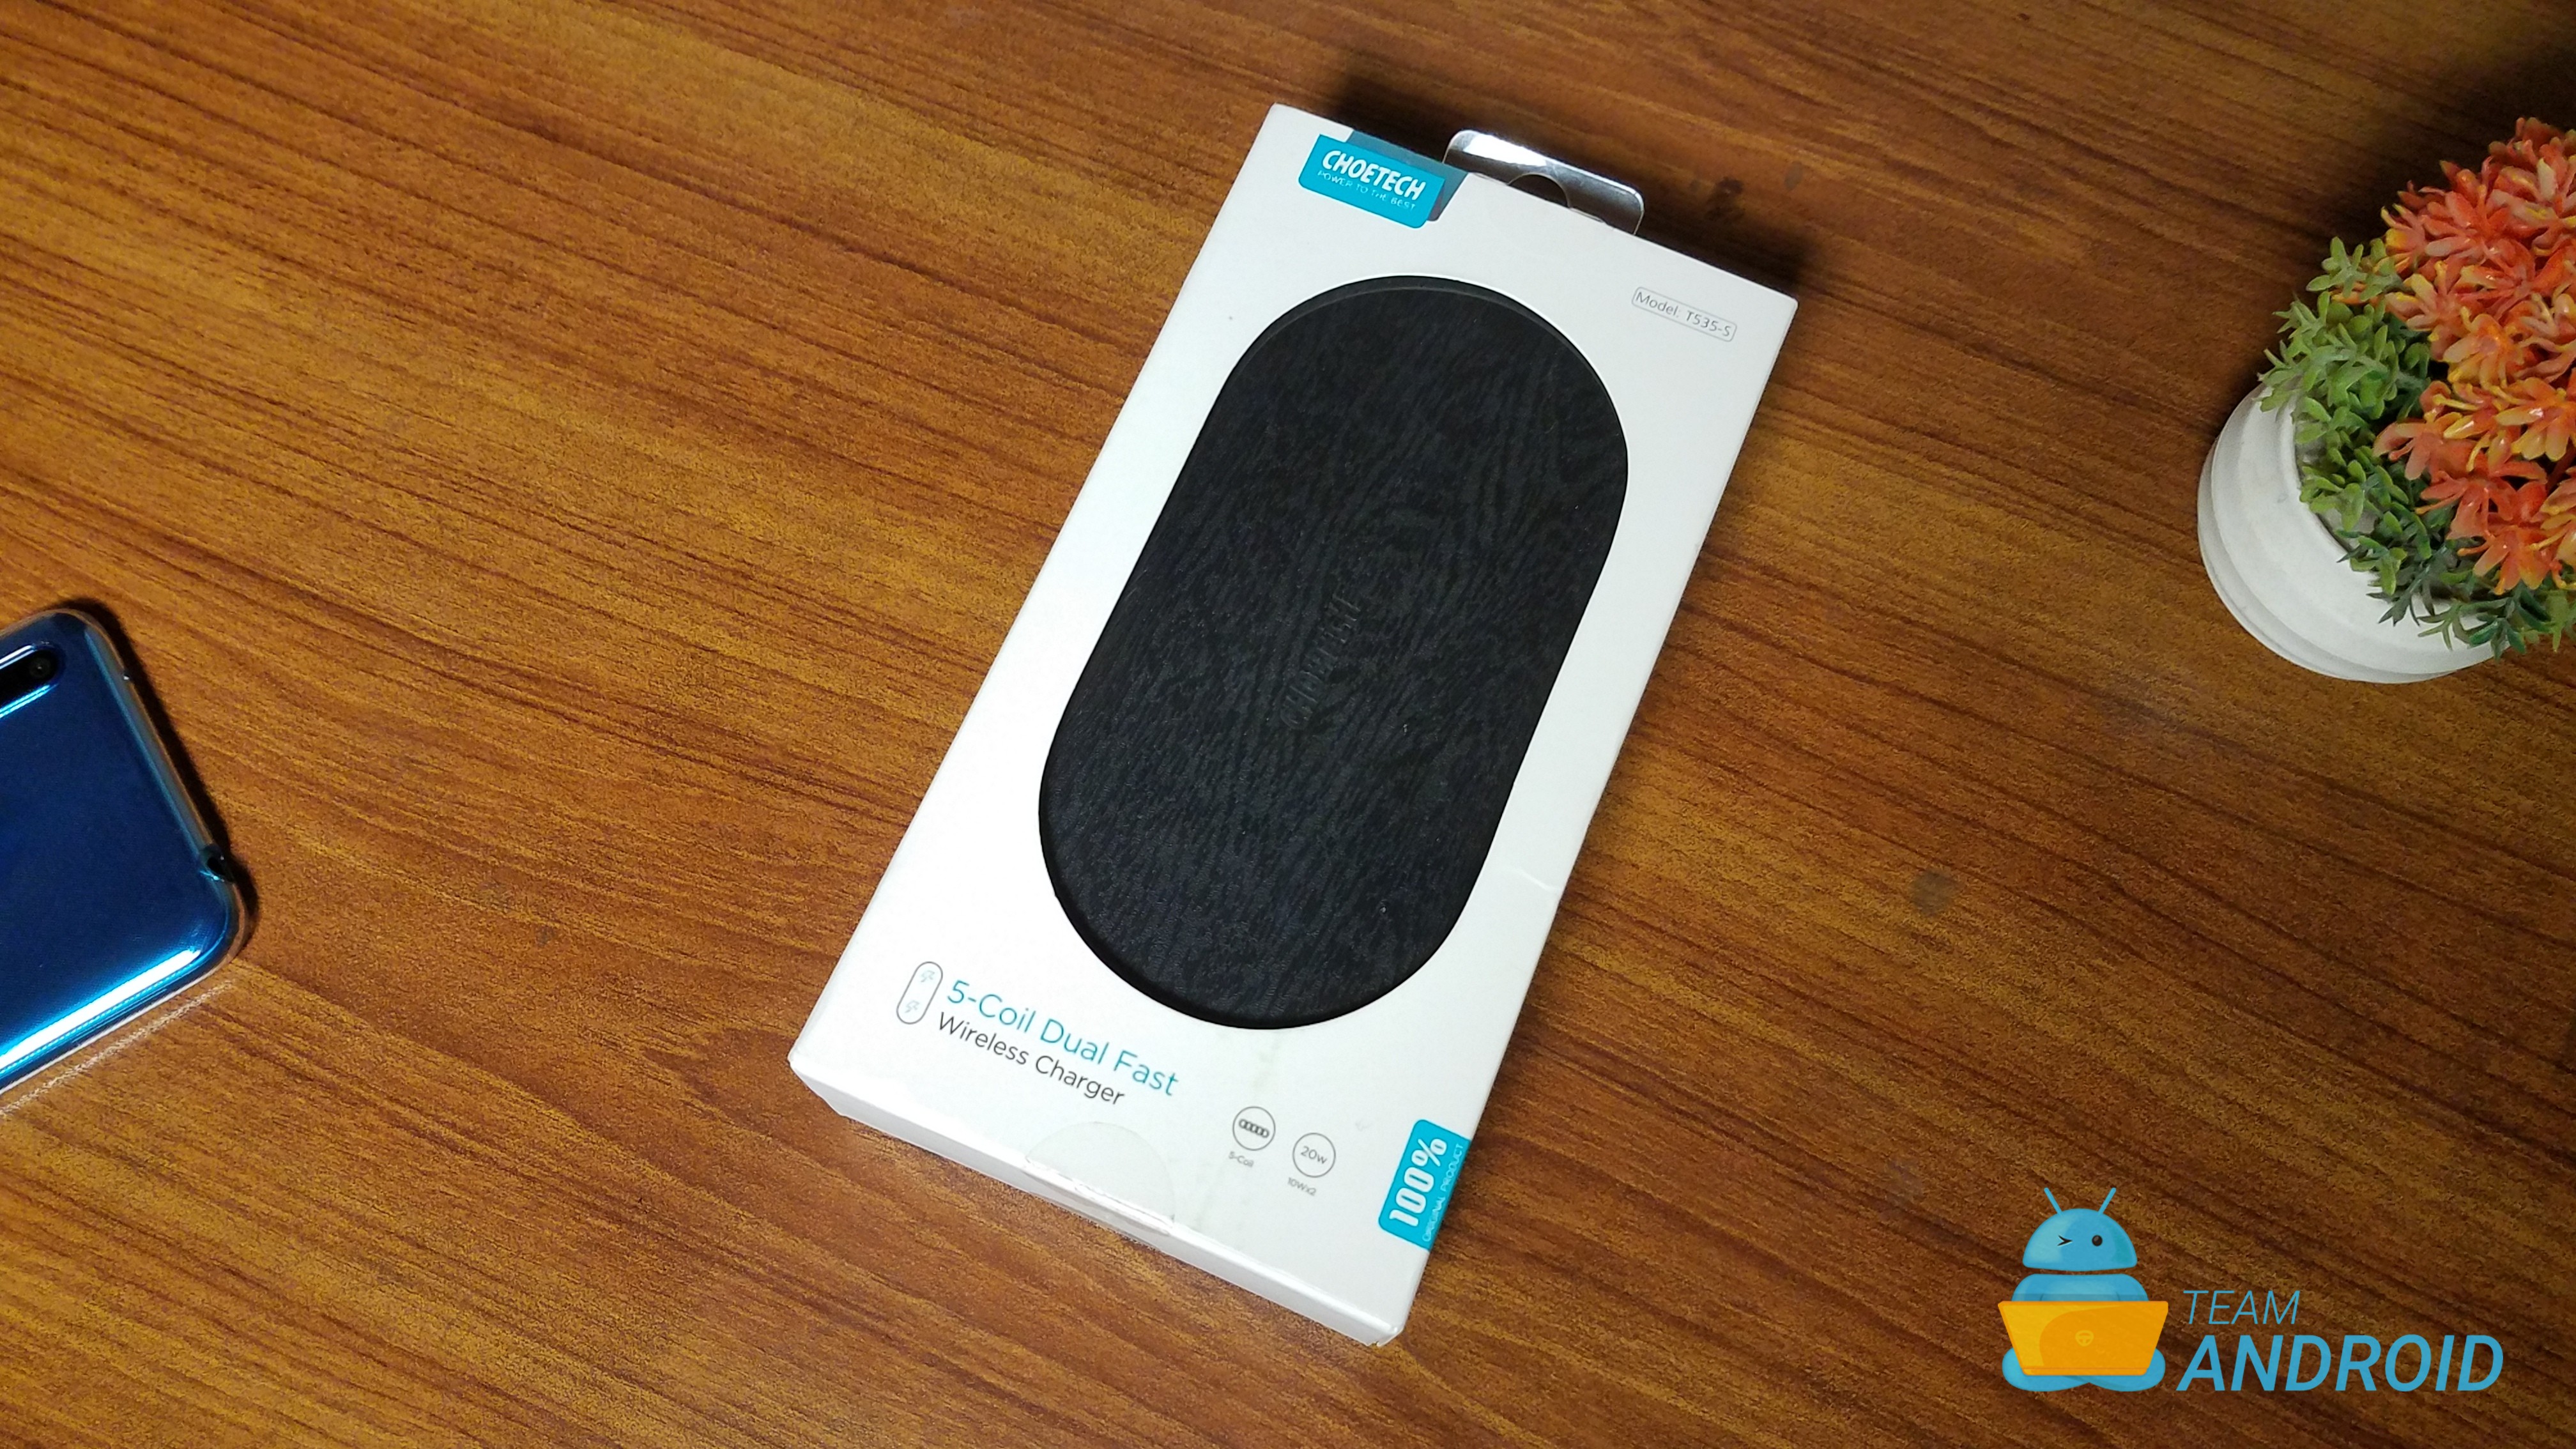 Choetech 5-Coil Dual Fast Wireless Charger